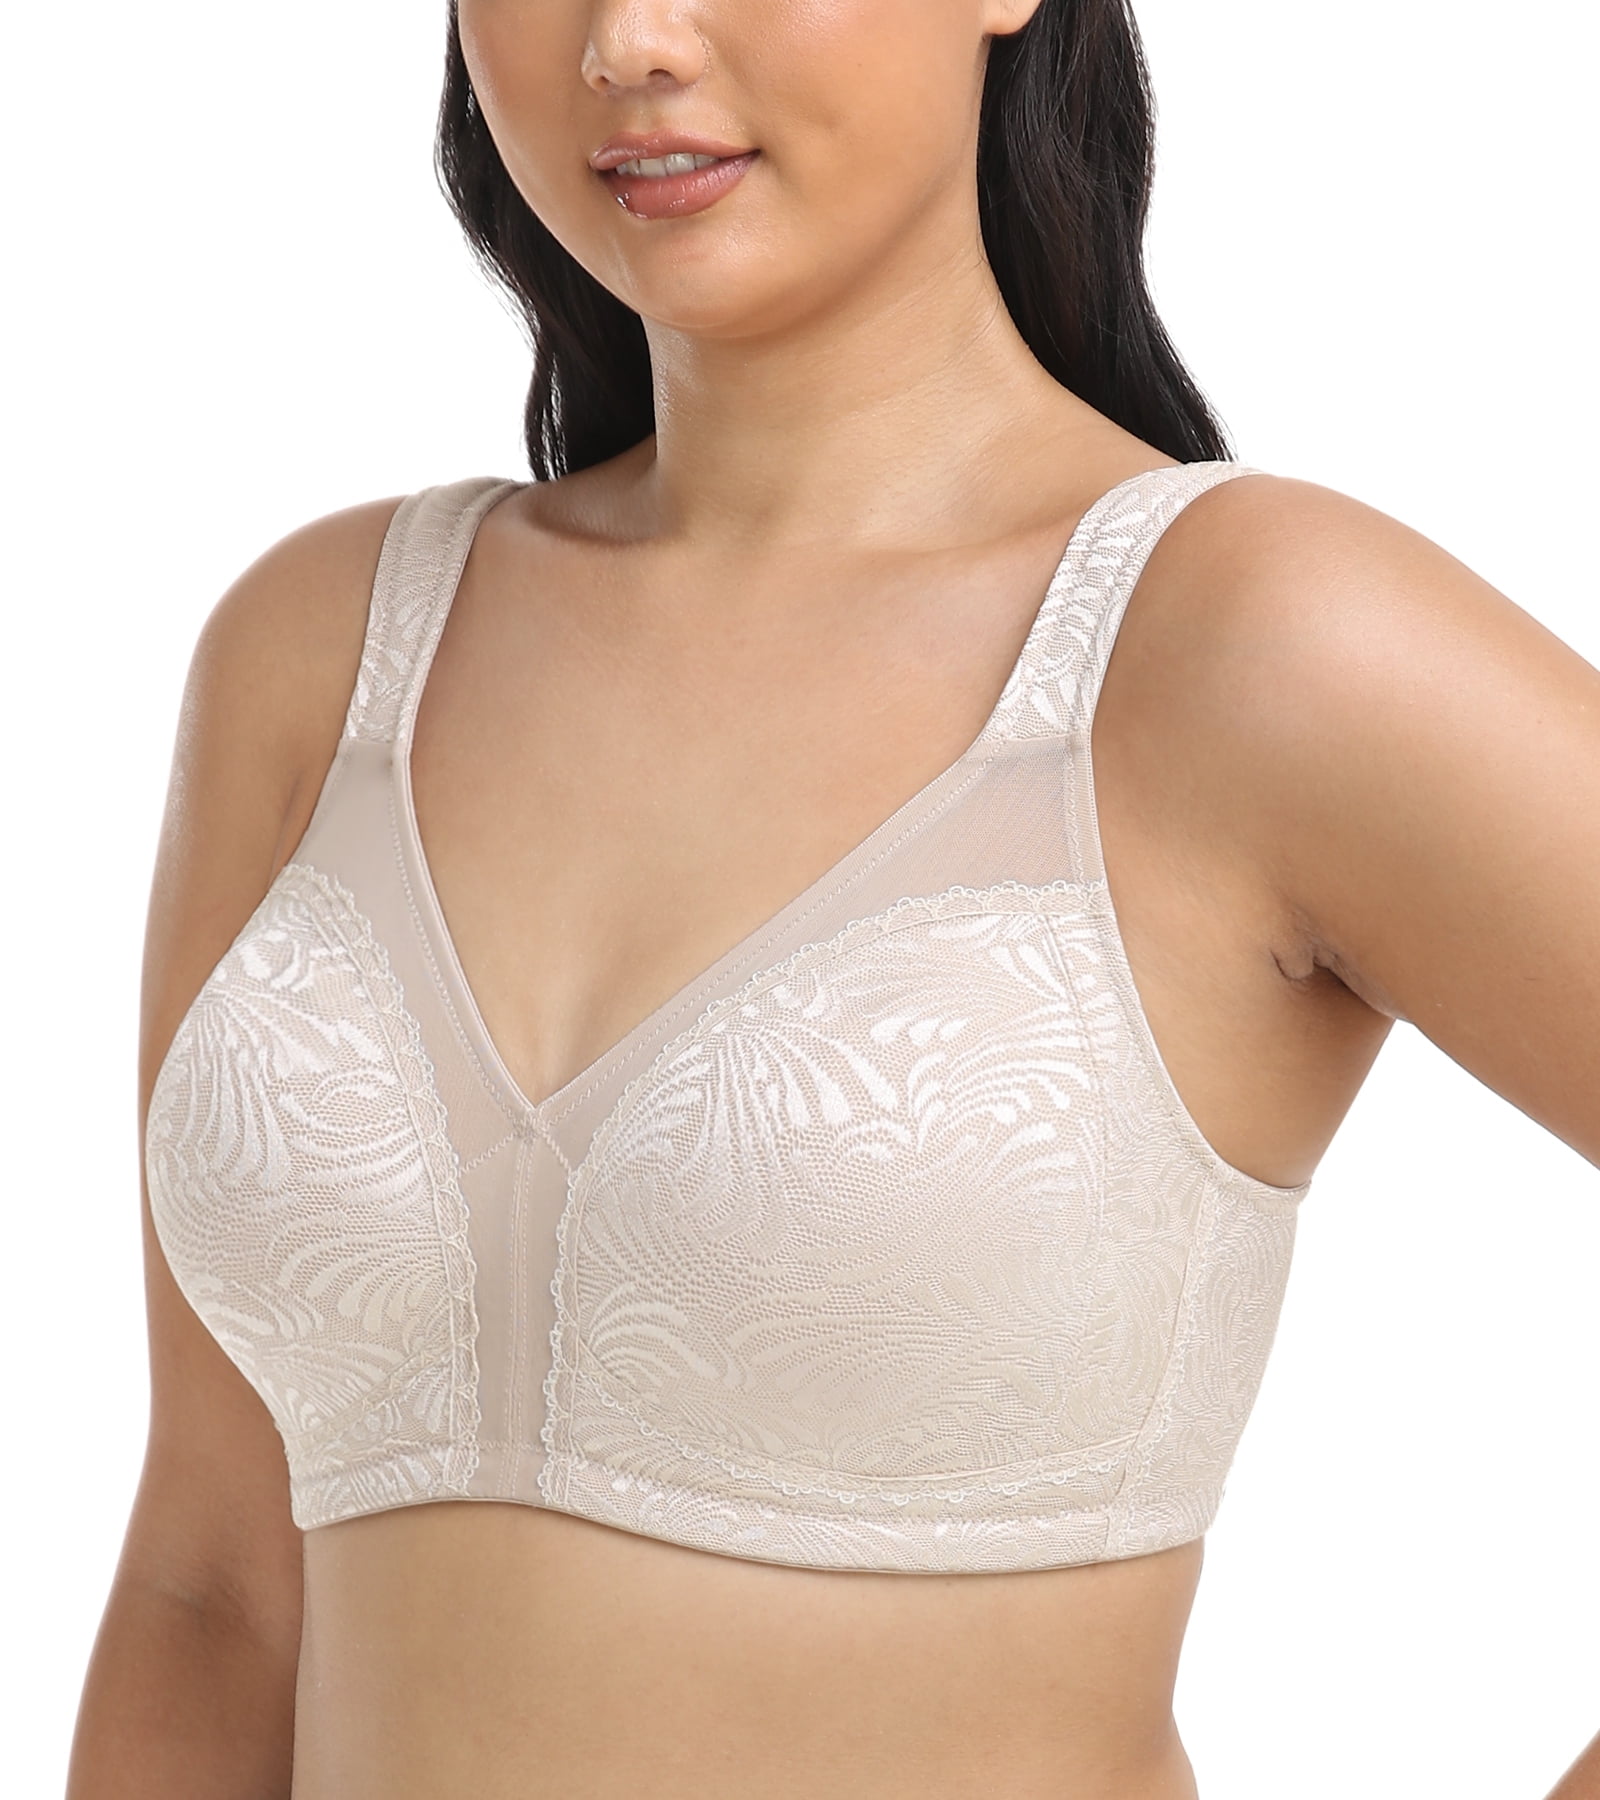  Womens Plus Size Wireless Bra Support Comfort Full Coverage  Unlined No Underwire Smooth Beige 42G